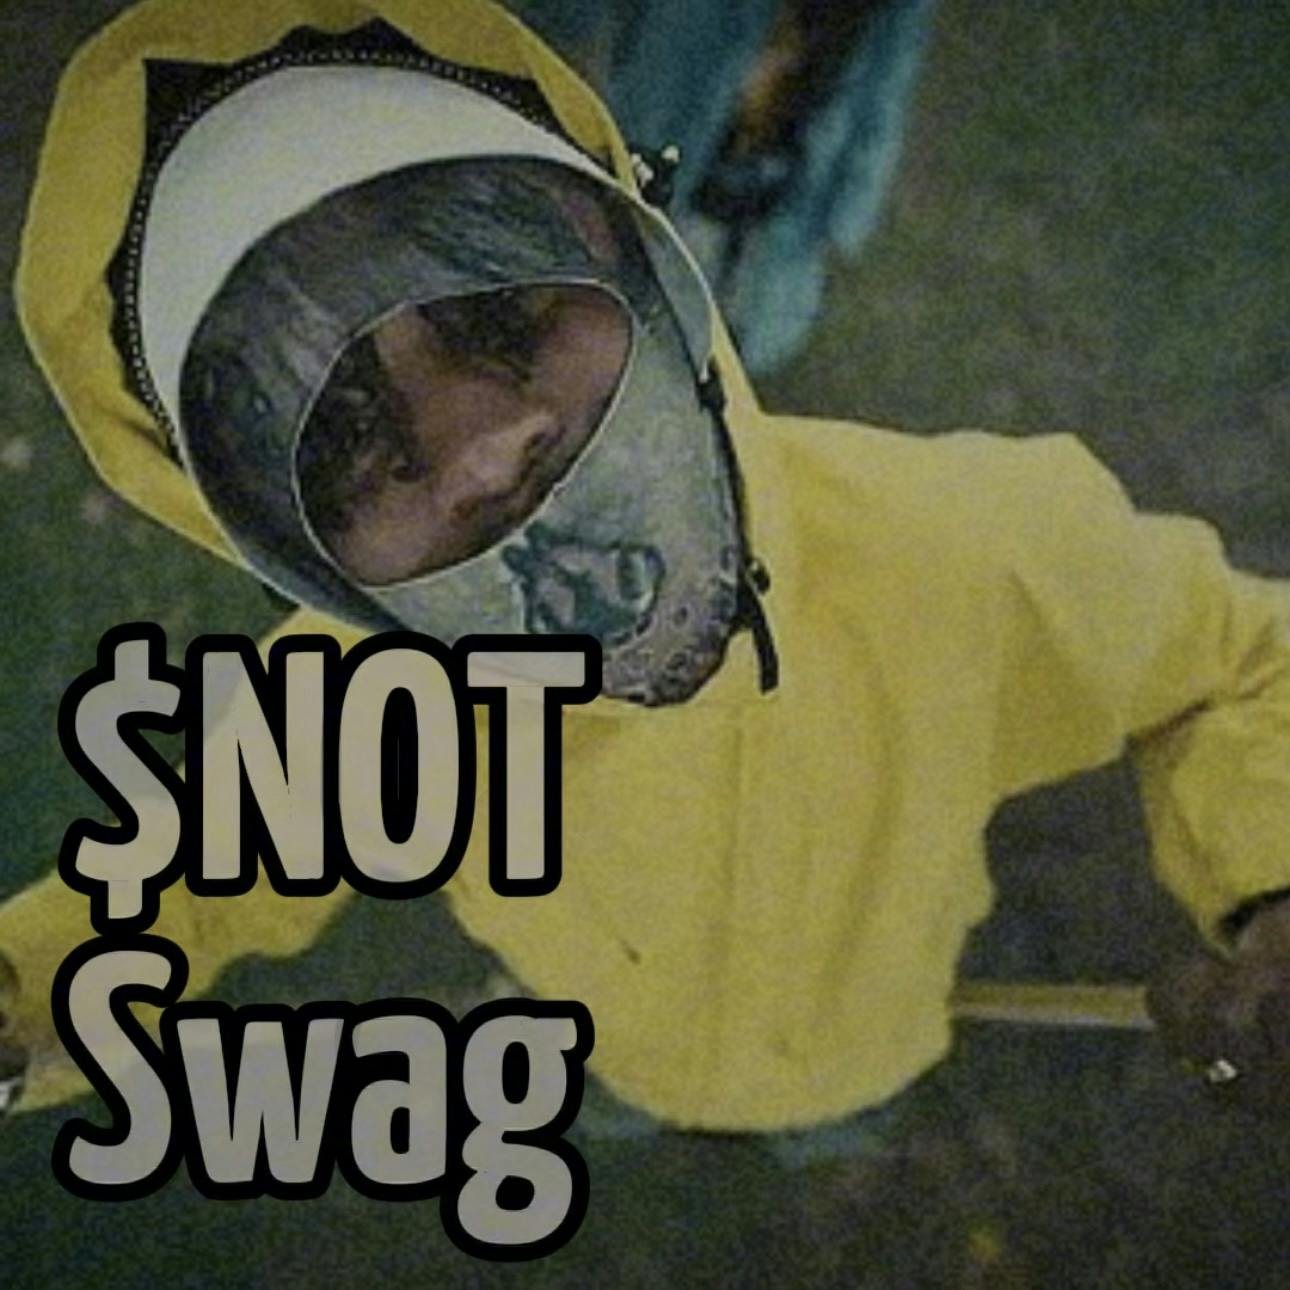 SNOT - Swag